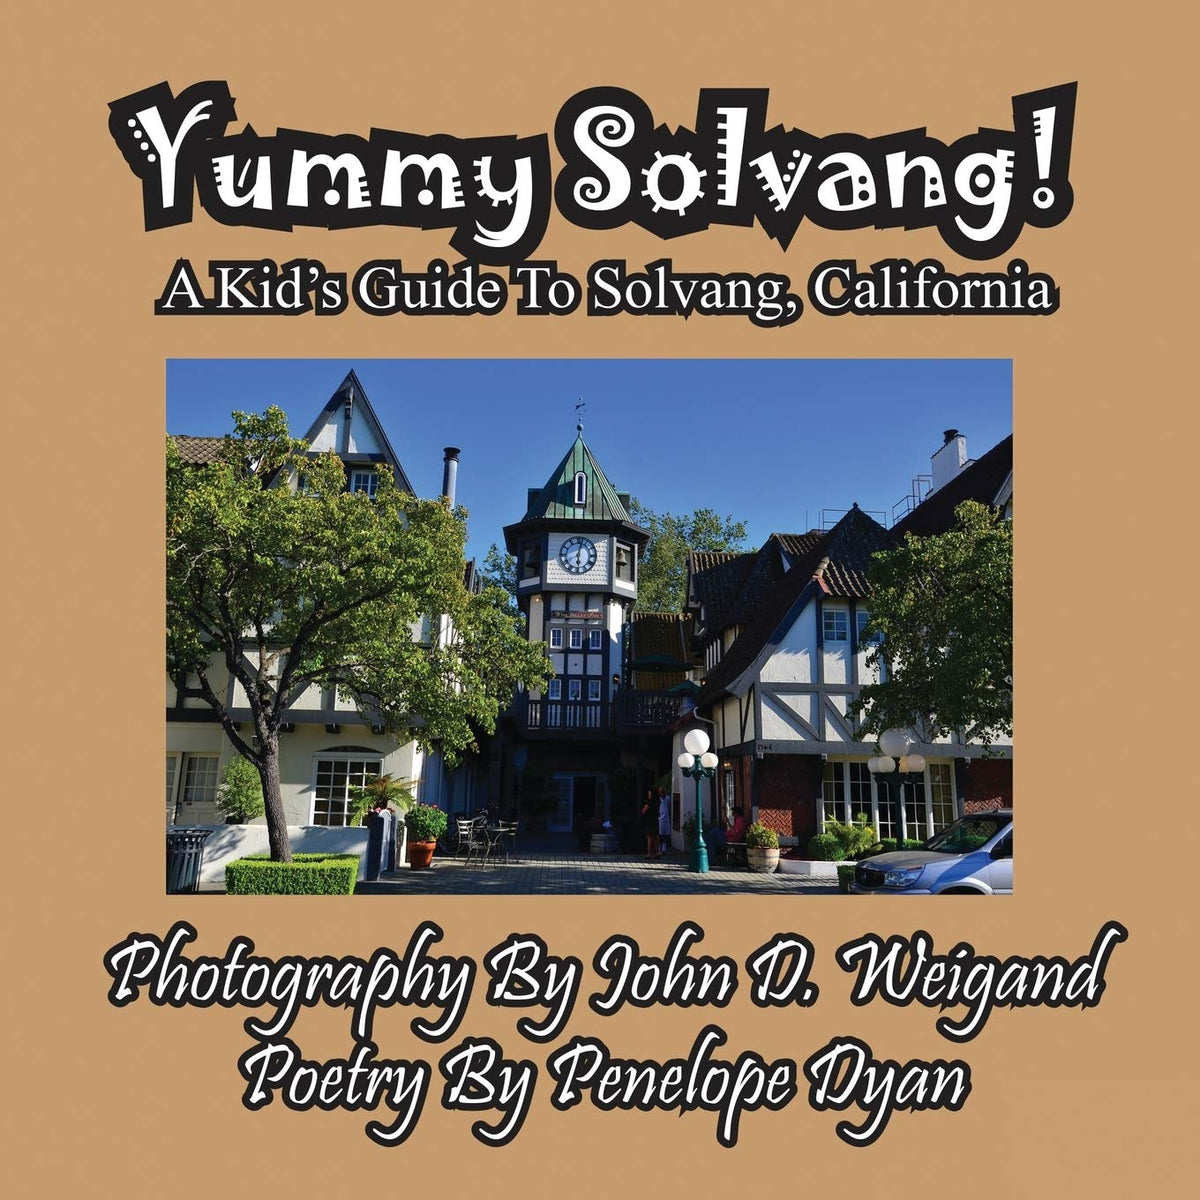 Yummy Solvang! A Kid's Guide To Solvang, California